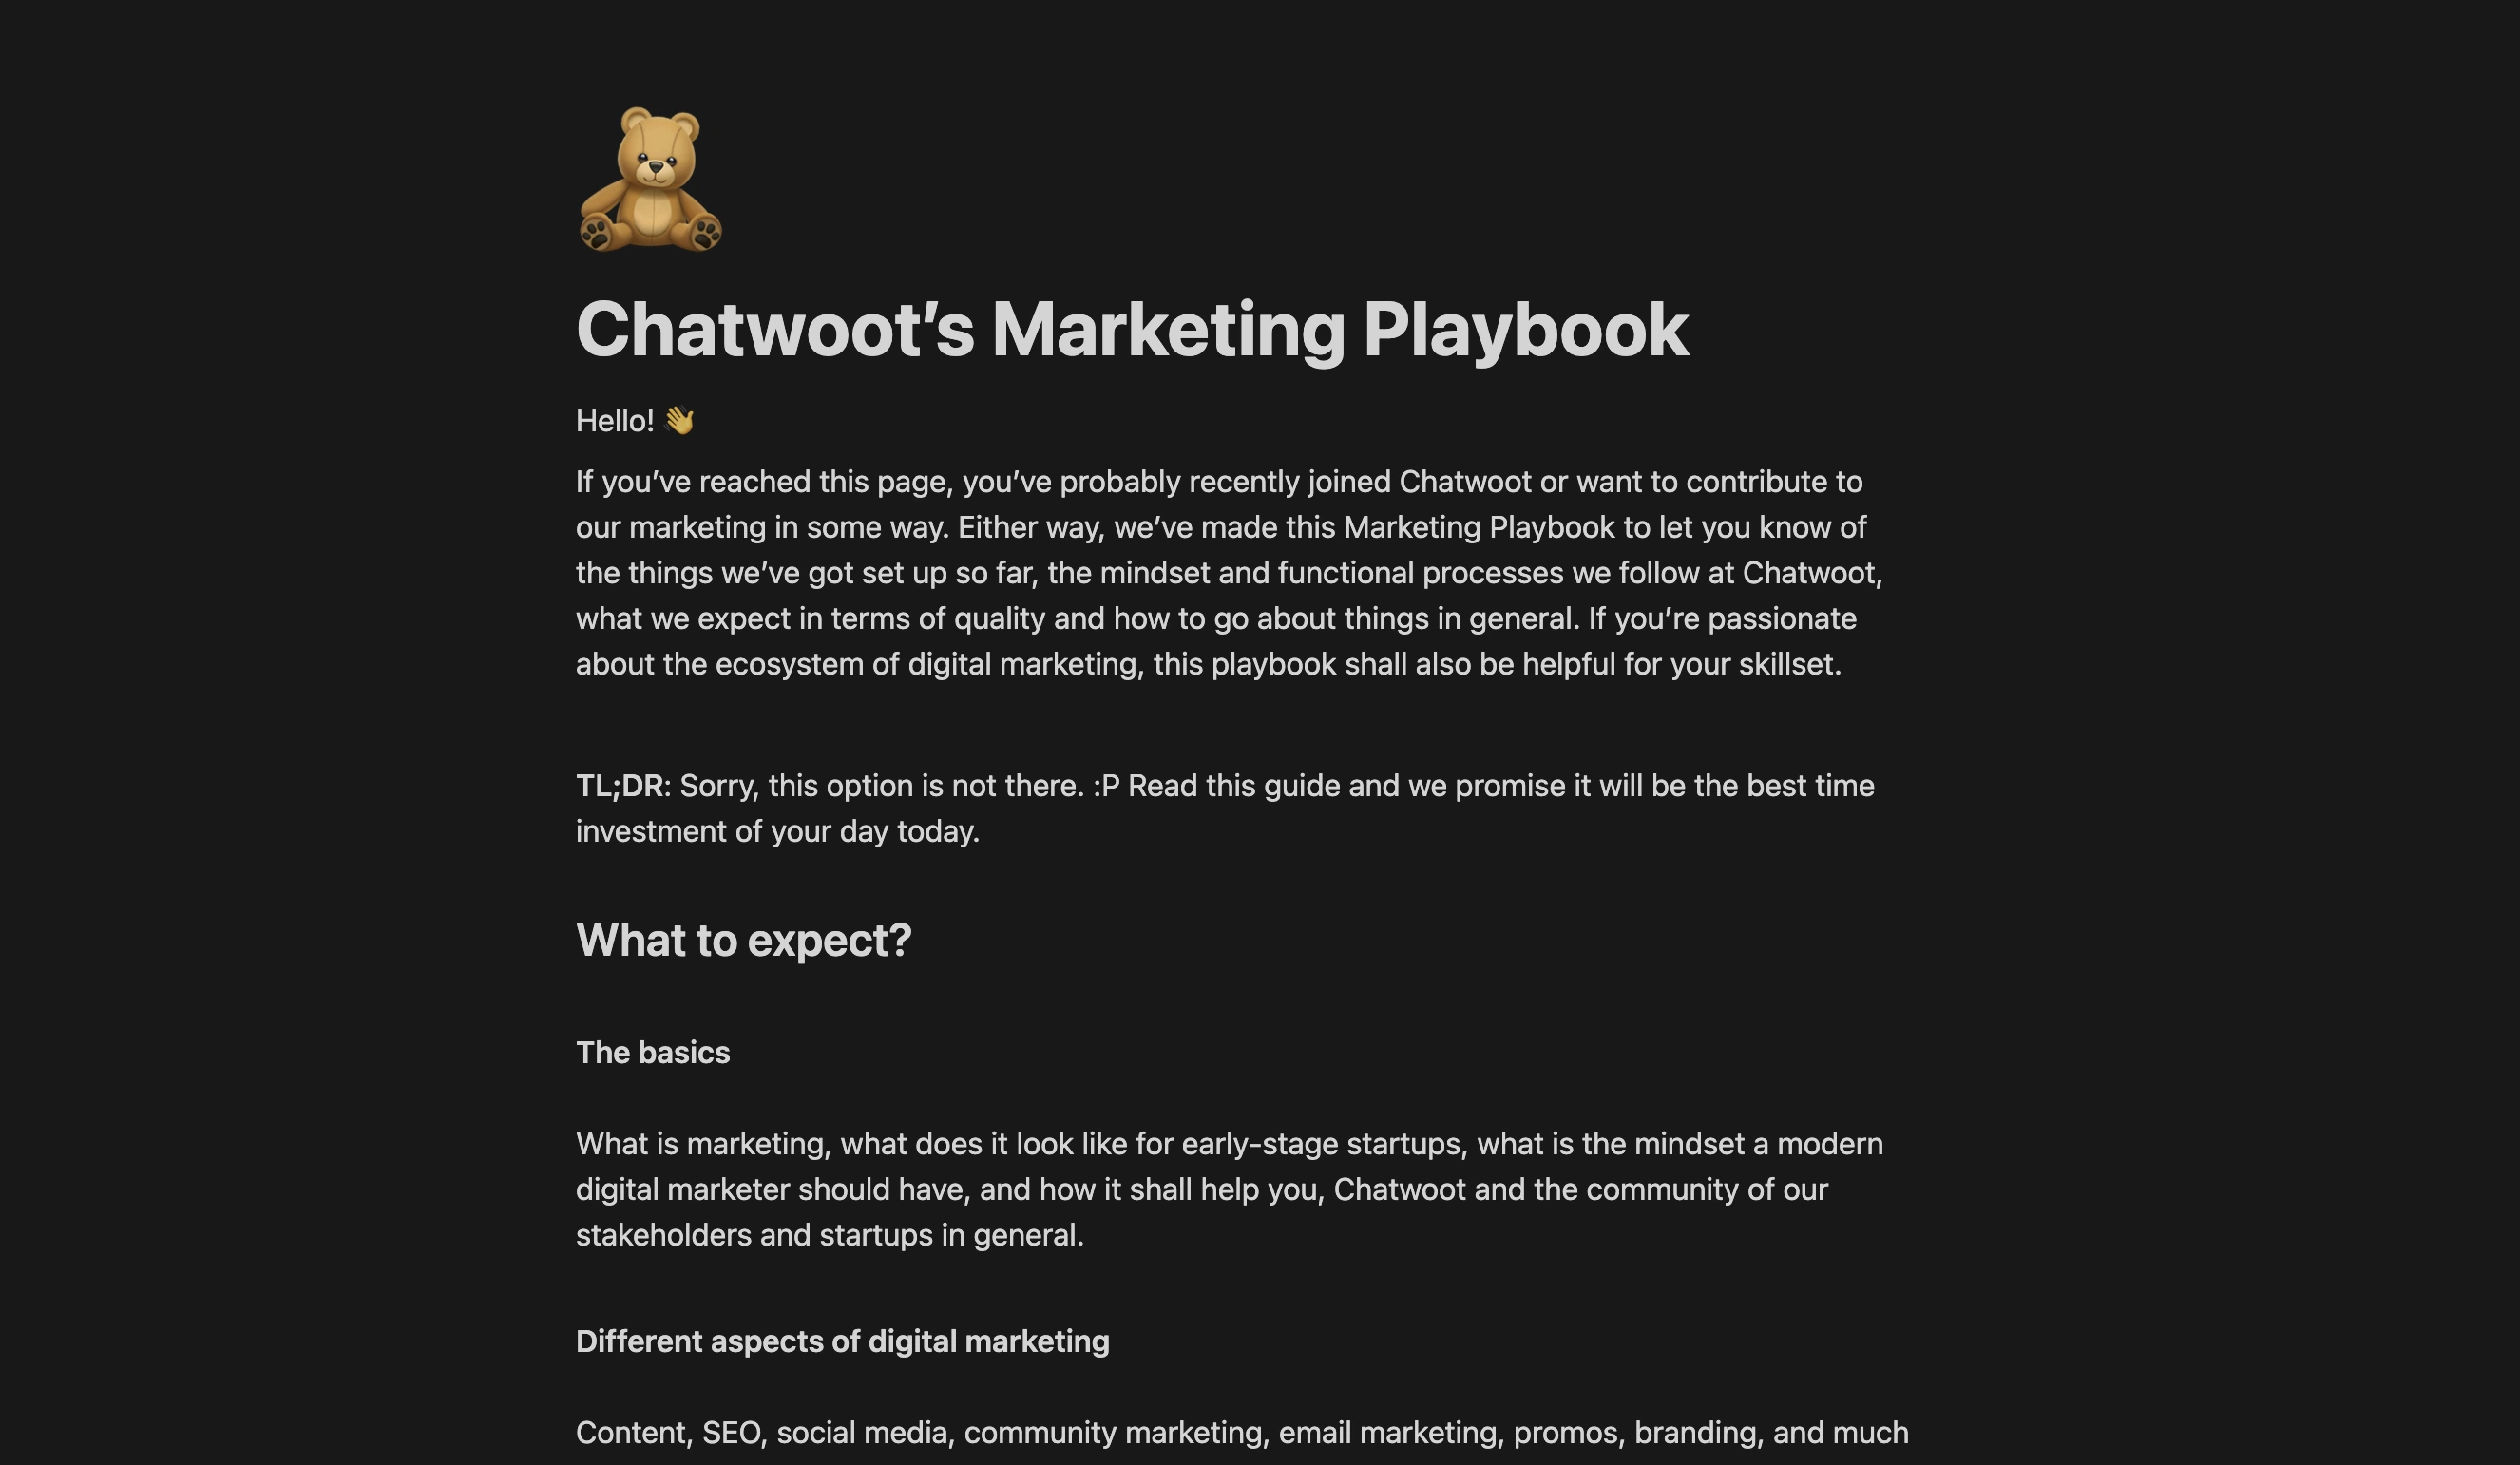 Chatwoot's Marketing Playbook